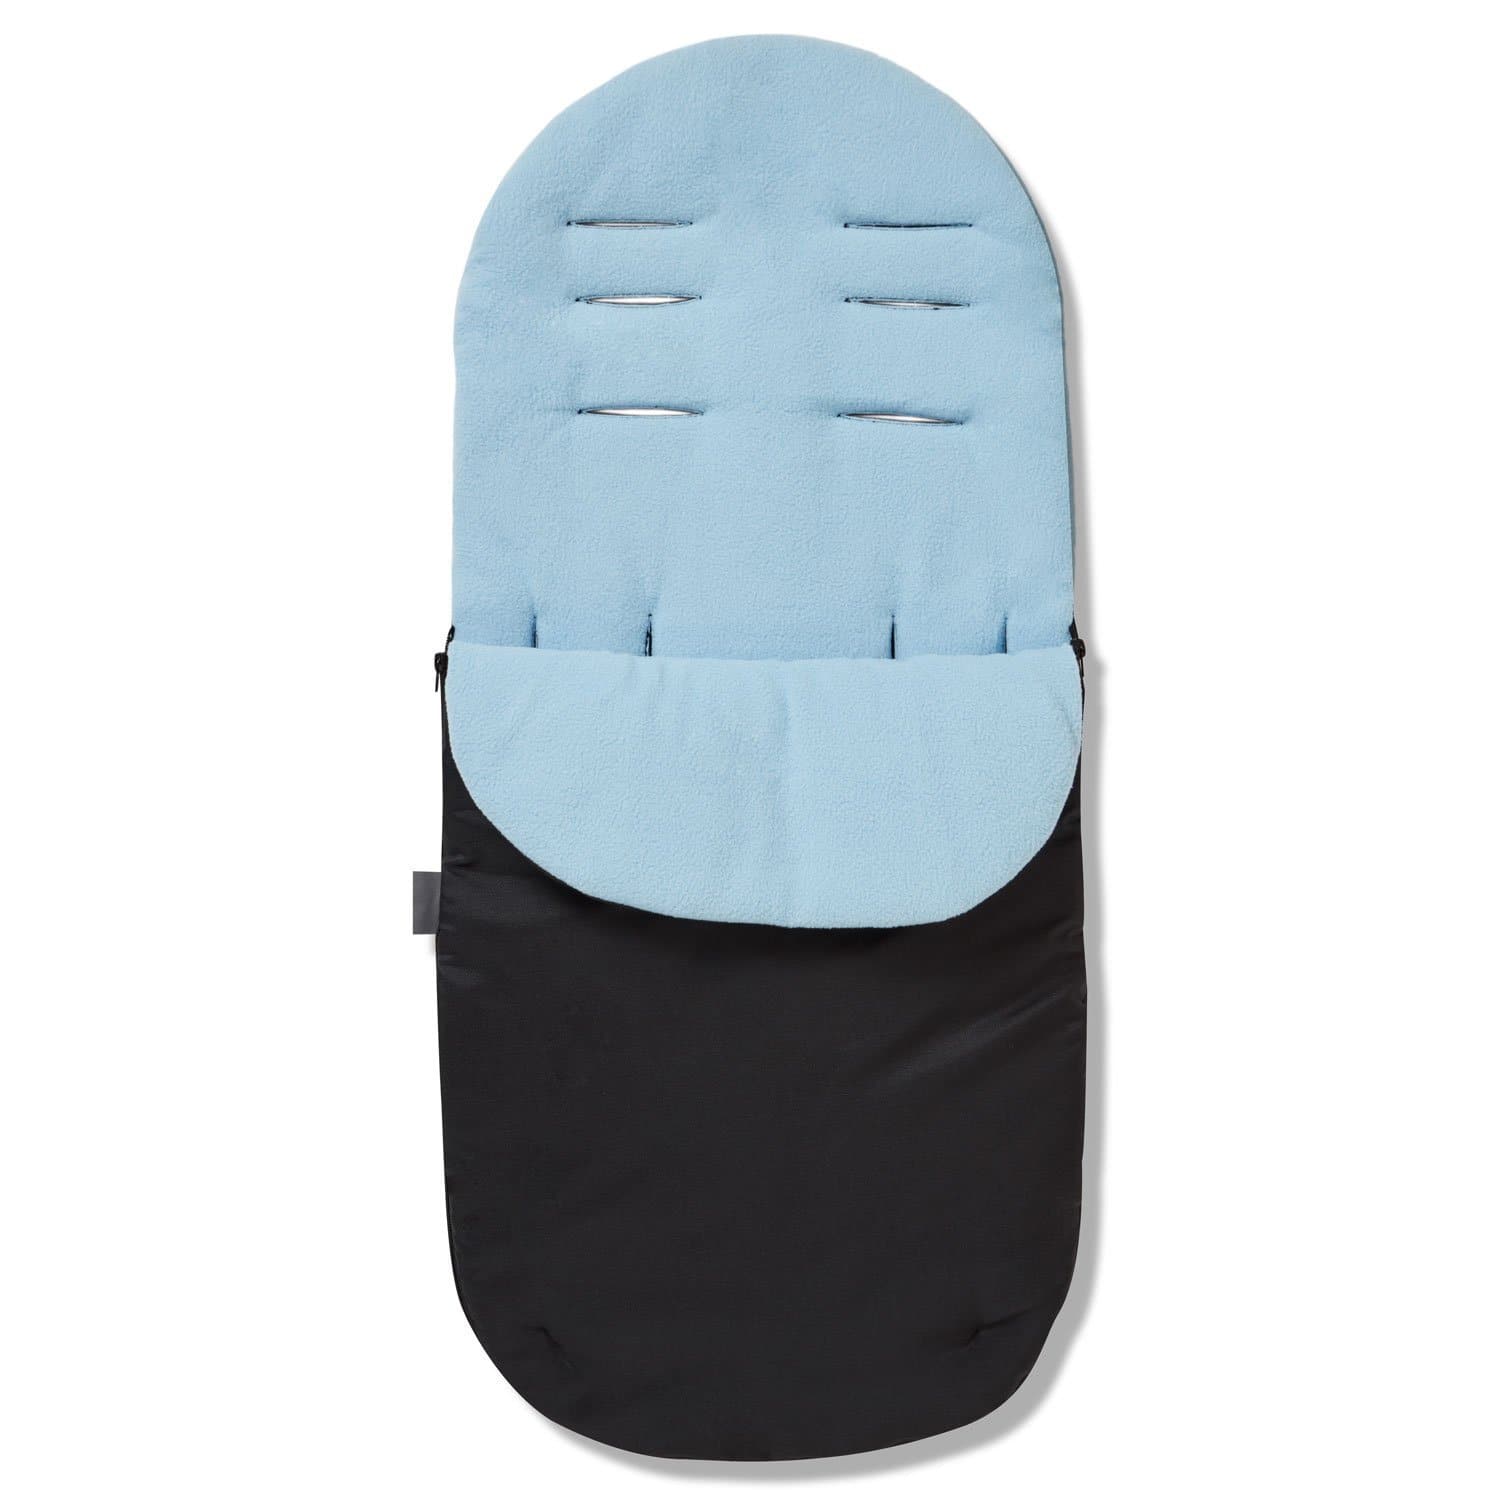 Footmuff / Cosy Toes Compatible with Nania - Light Blue / Fits All Models | For Your Little One